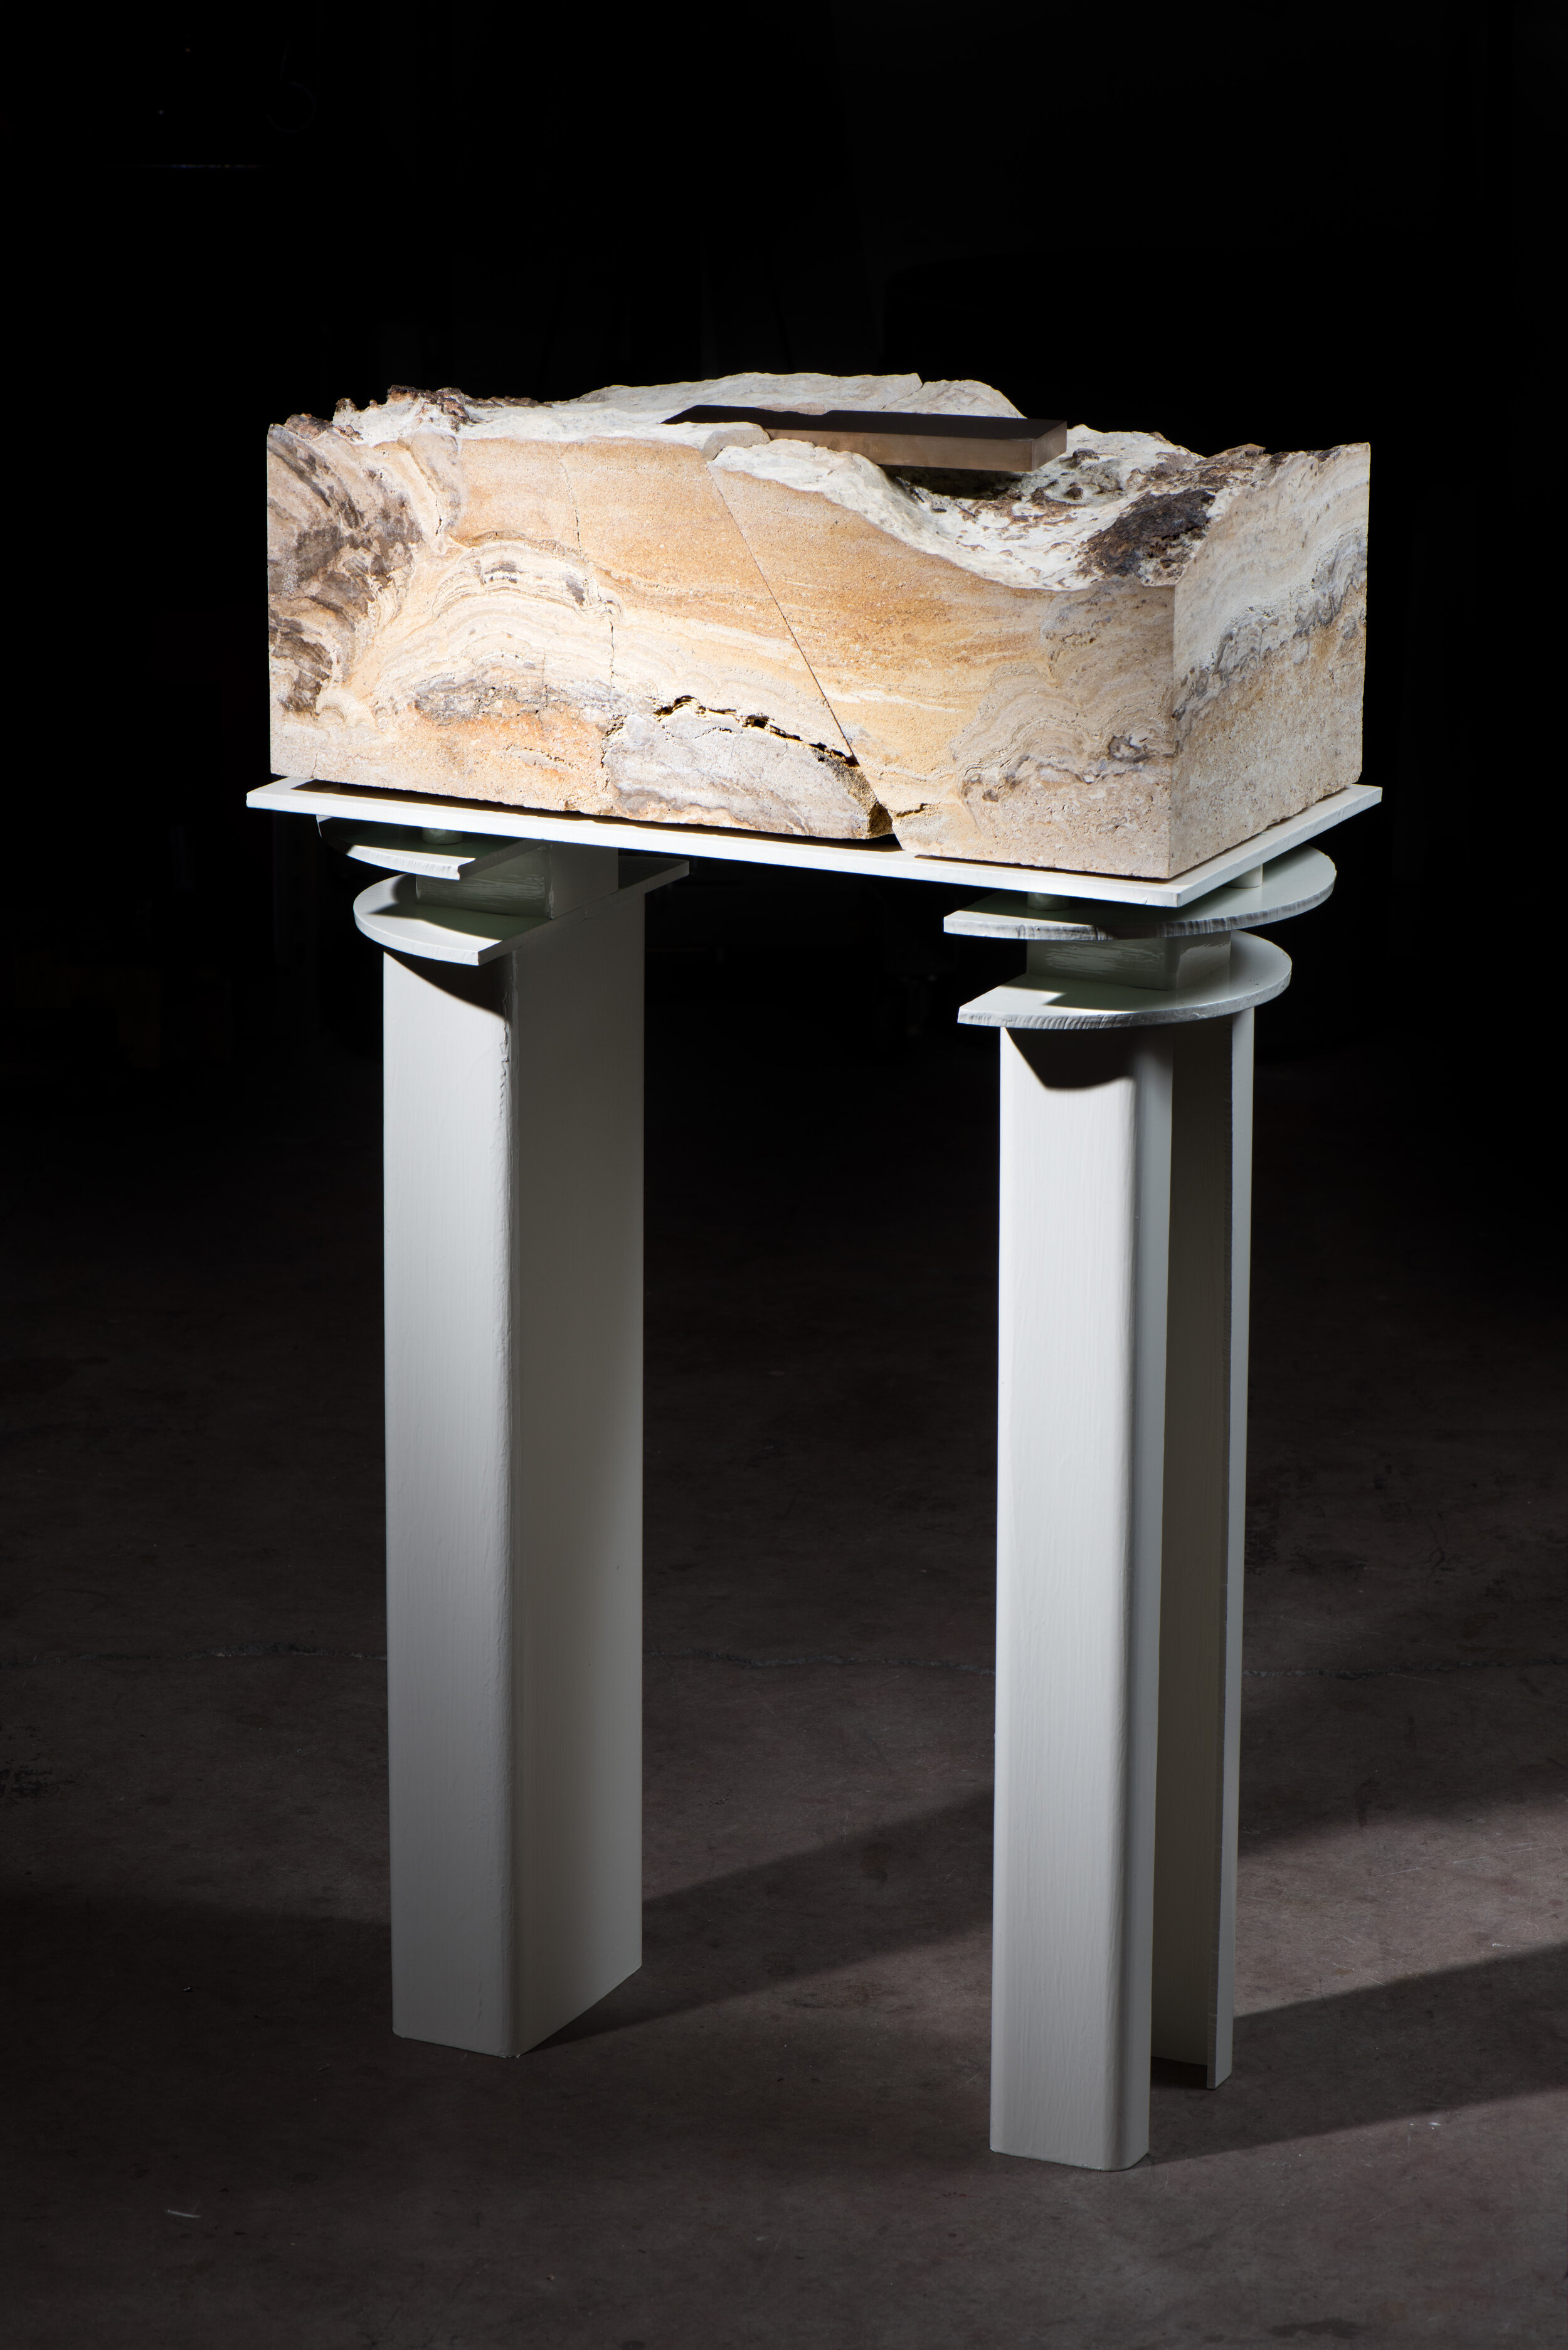   Model of an Earth Fastener on the Delphi Fault (Temple of Apollo) , 2019 Steel, enamel, limestone, and bronze 43 x 27 x 14 inches 109.2 x 68.63 x 35.6 cm Unique KYWH-0019 